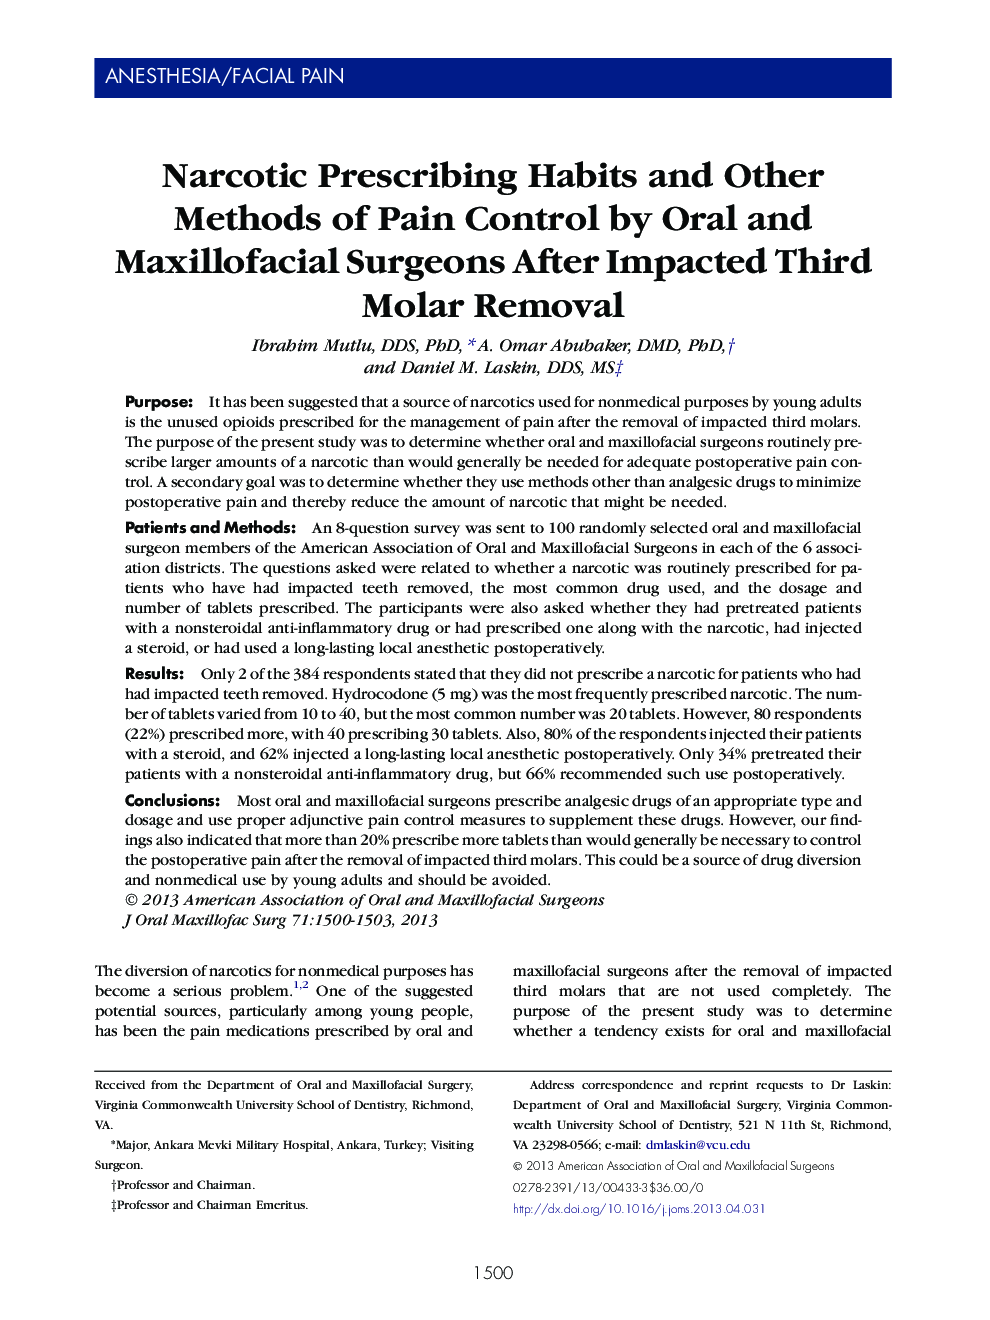 Narcotic Prescribing Habits and Other Methods of Pain Control by Oral and Maxillofacial Surgeons After Impacted Third Molar Removal